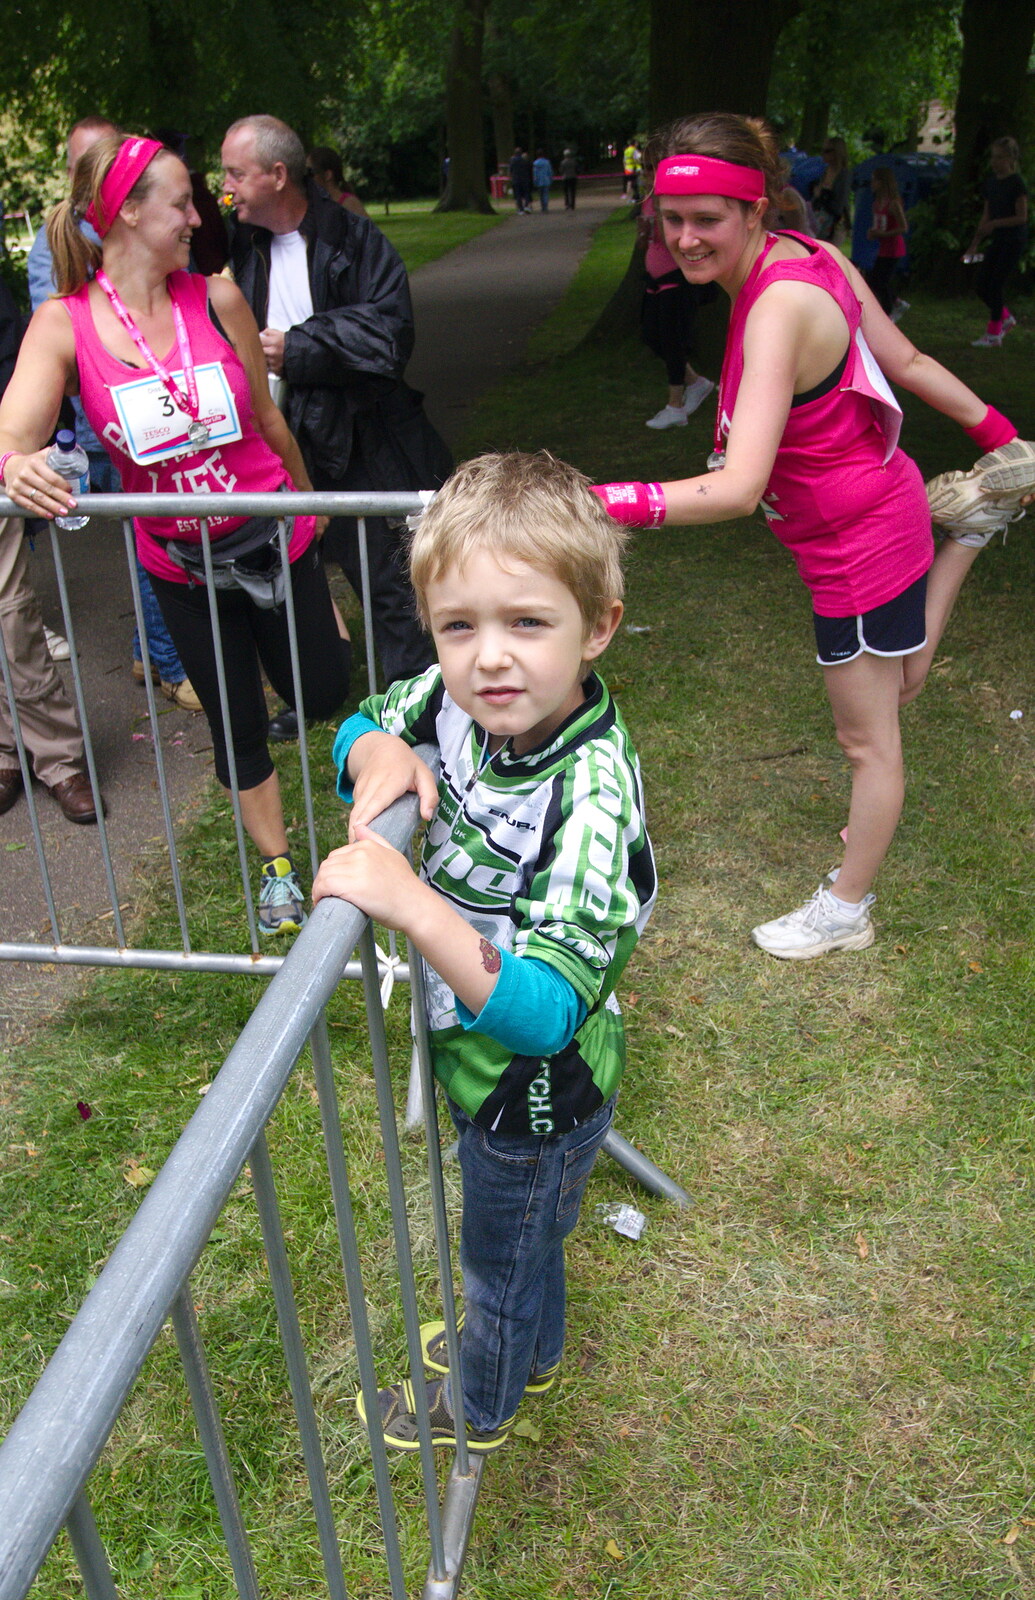 Fred looks on as some 'warm down' exercises occur from Isobel's Race For Life, Chantry Park, Ipswich - 11th June 2014